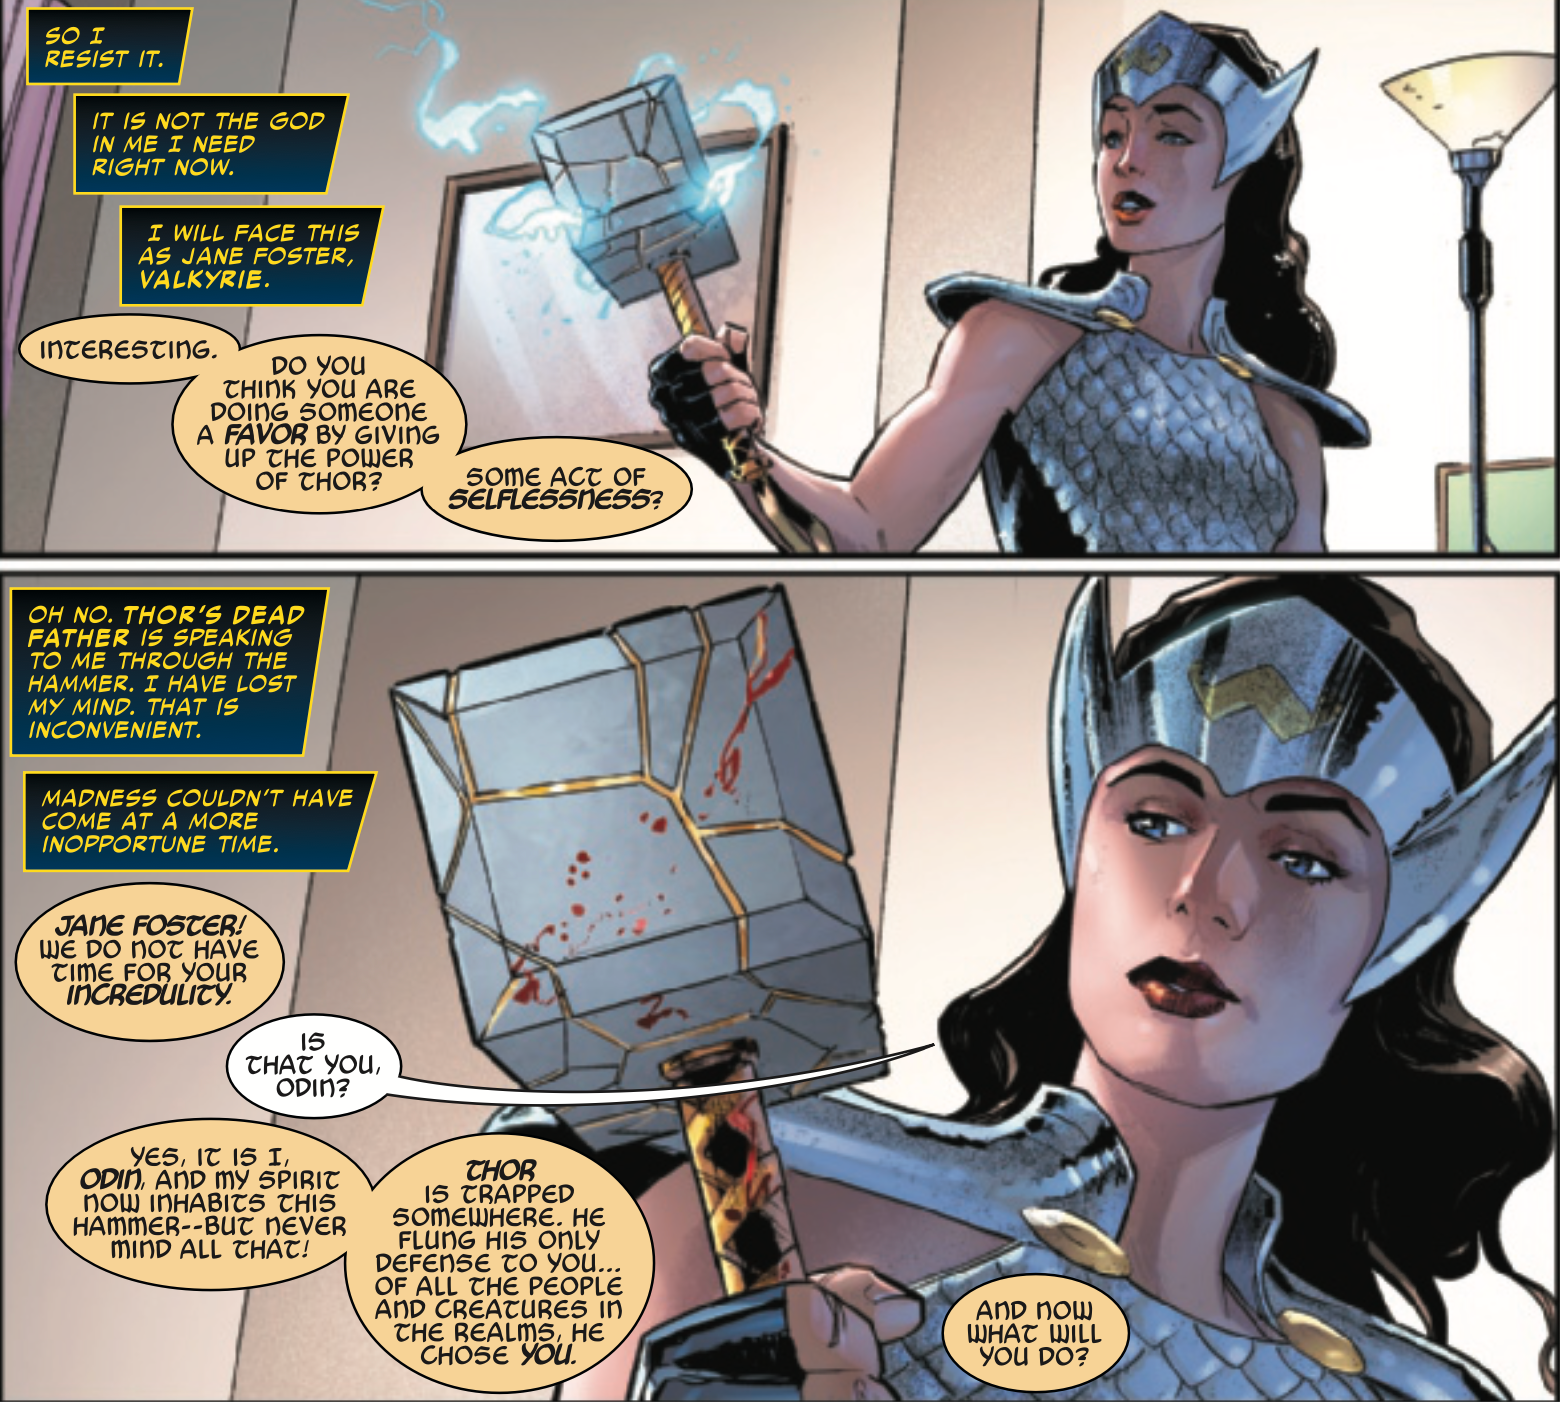 Jane Foster Learns One of Thor's Biggest Secrets